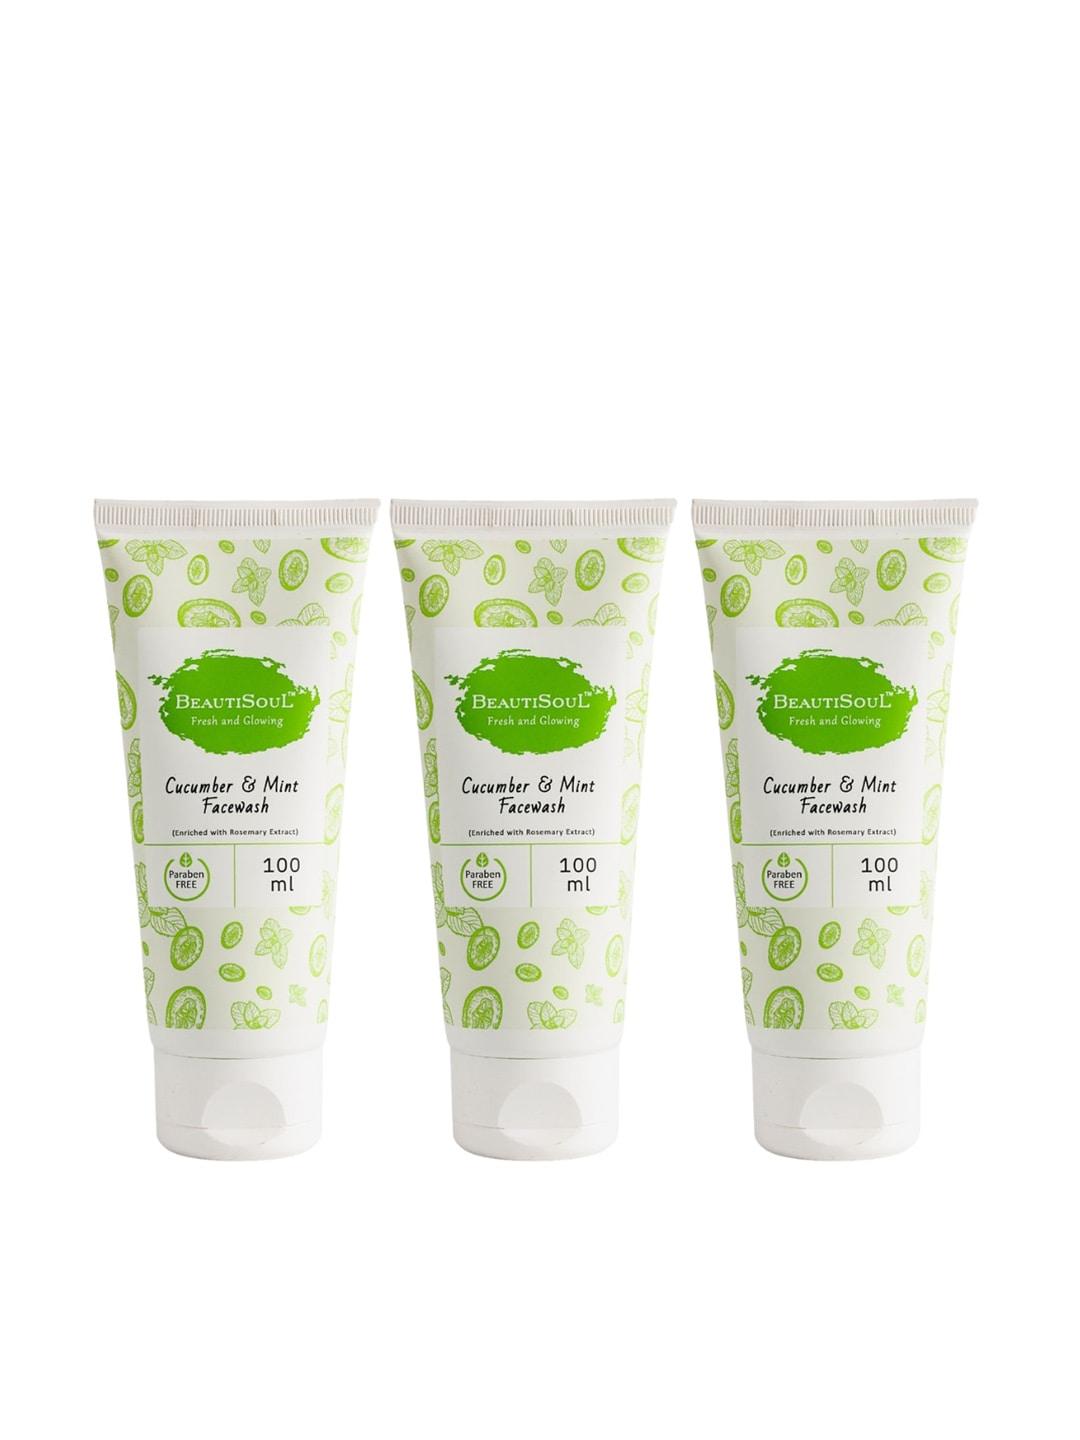 beautisoul pack of 3 cucumber and mint face wash -100ml each